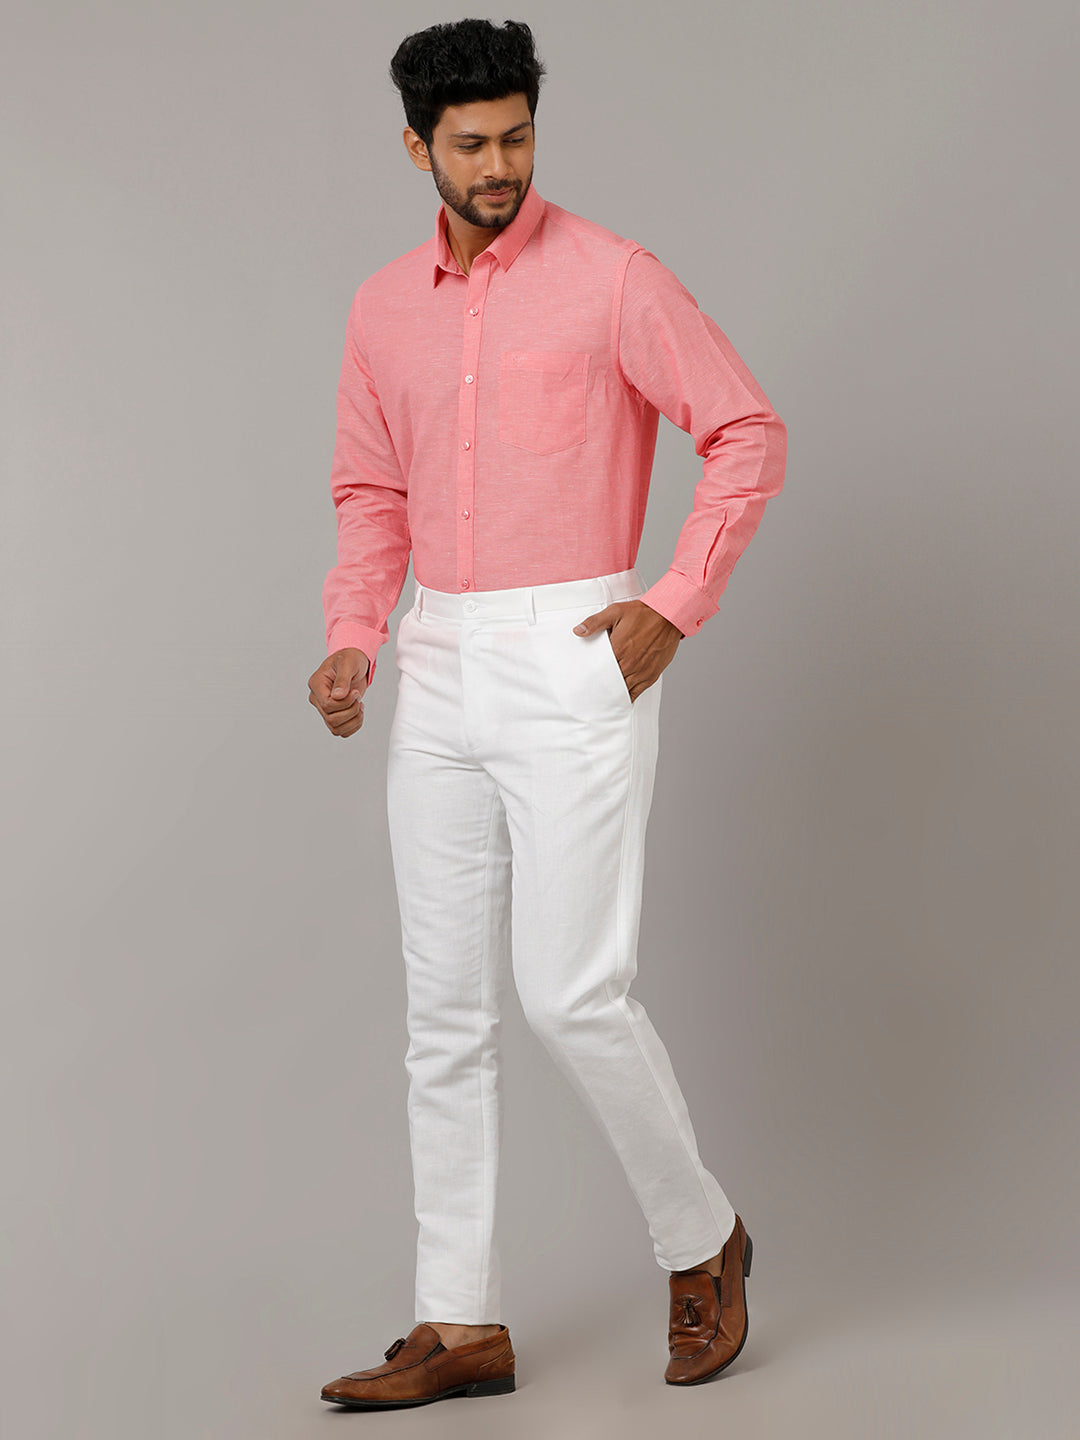 Ramraj Cotton - Look smart with formal cotton shirts from... | Facebook